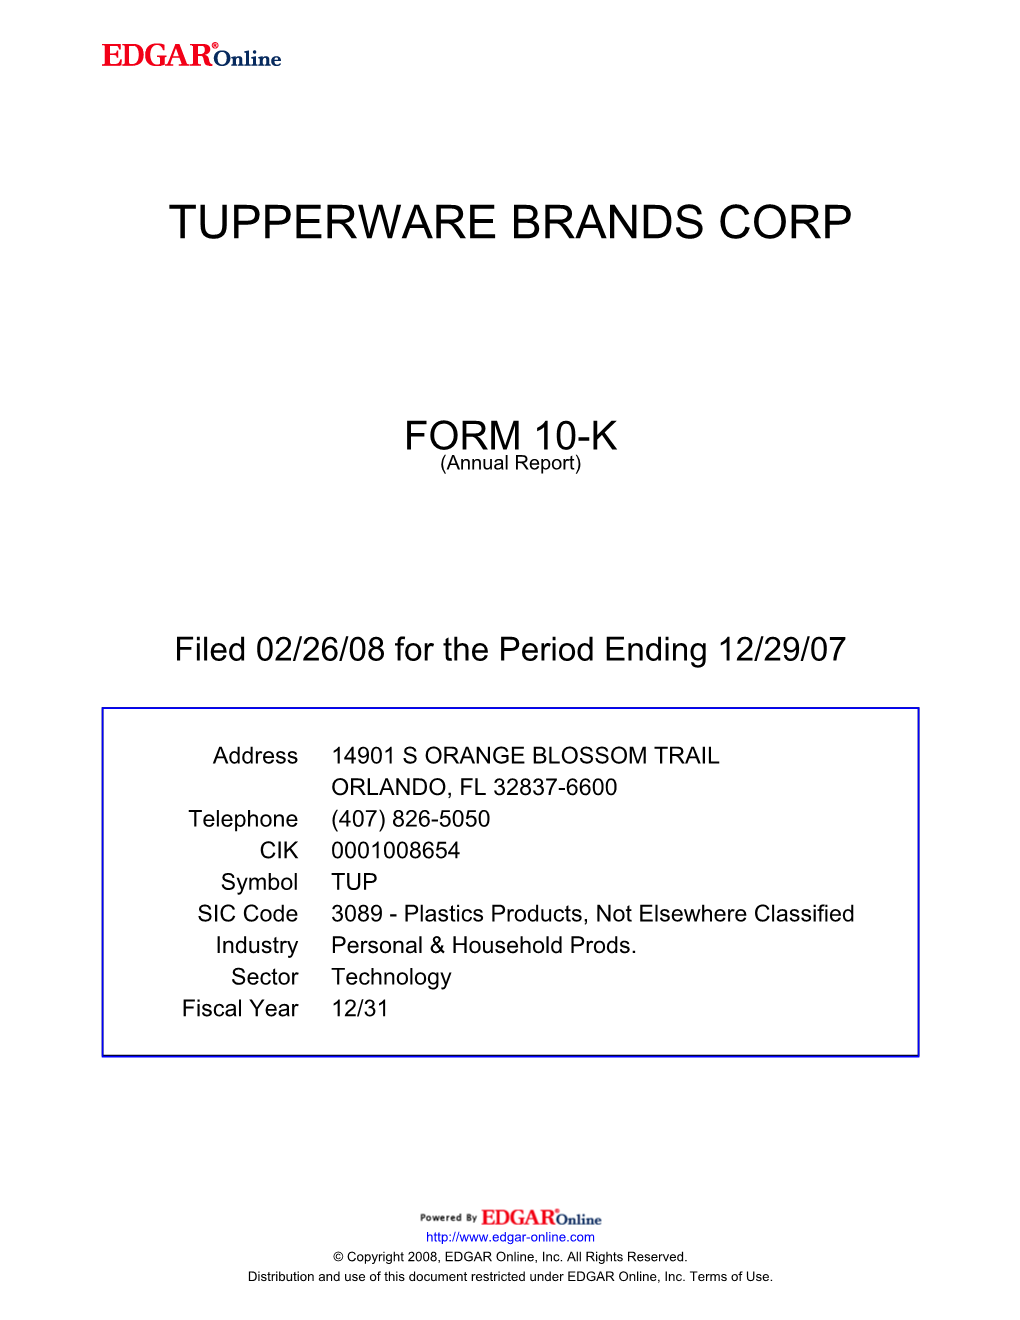 TUPPERWARE BRANDS CORPORATION (Exact Name of Registrant As Specified in Its Charter)